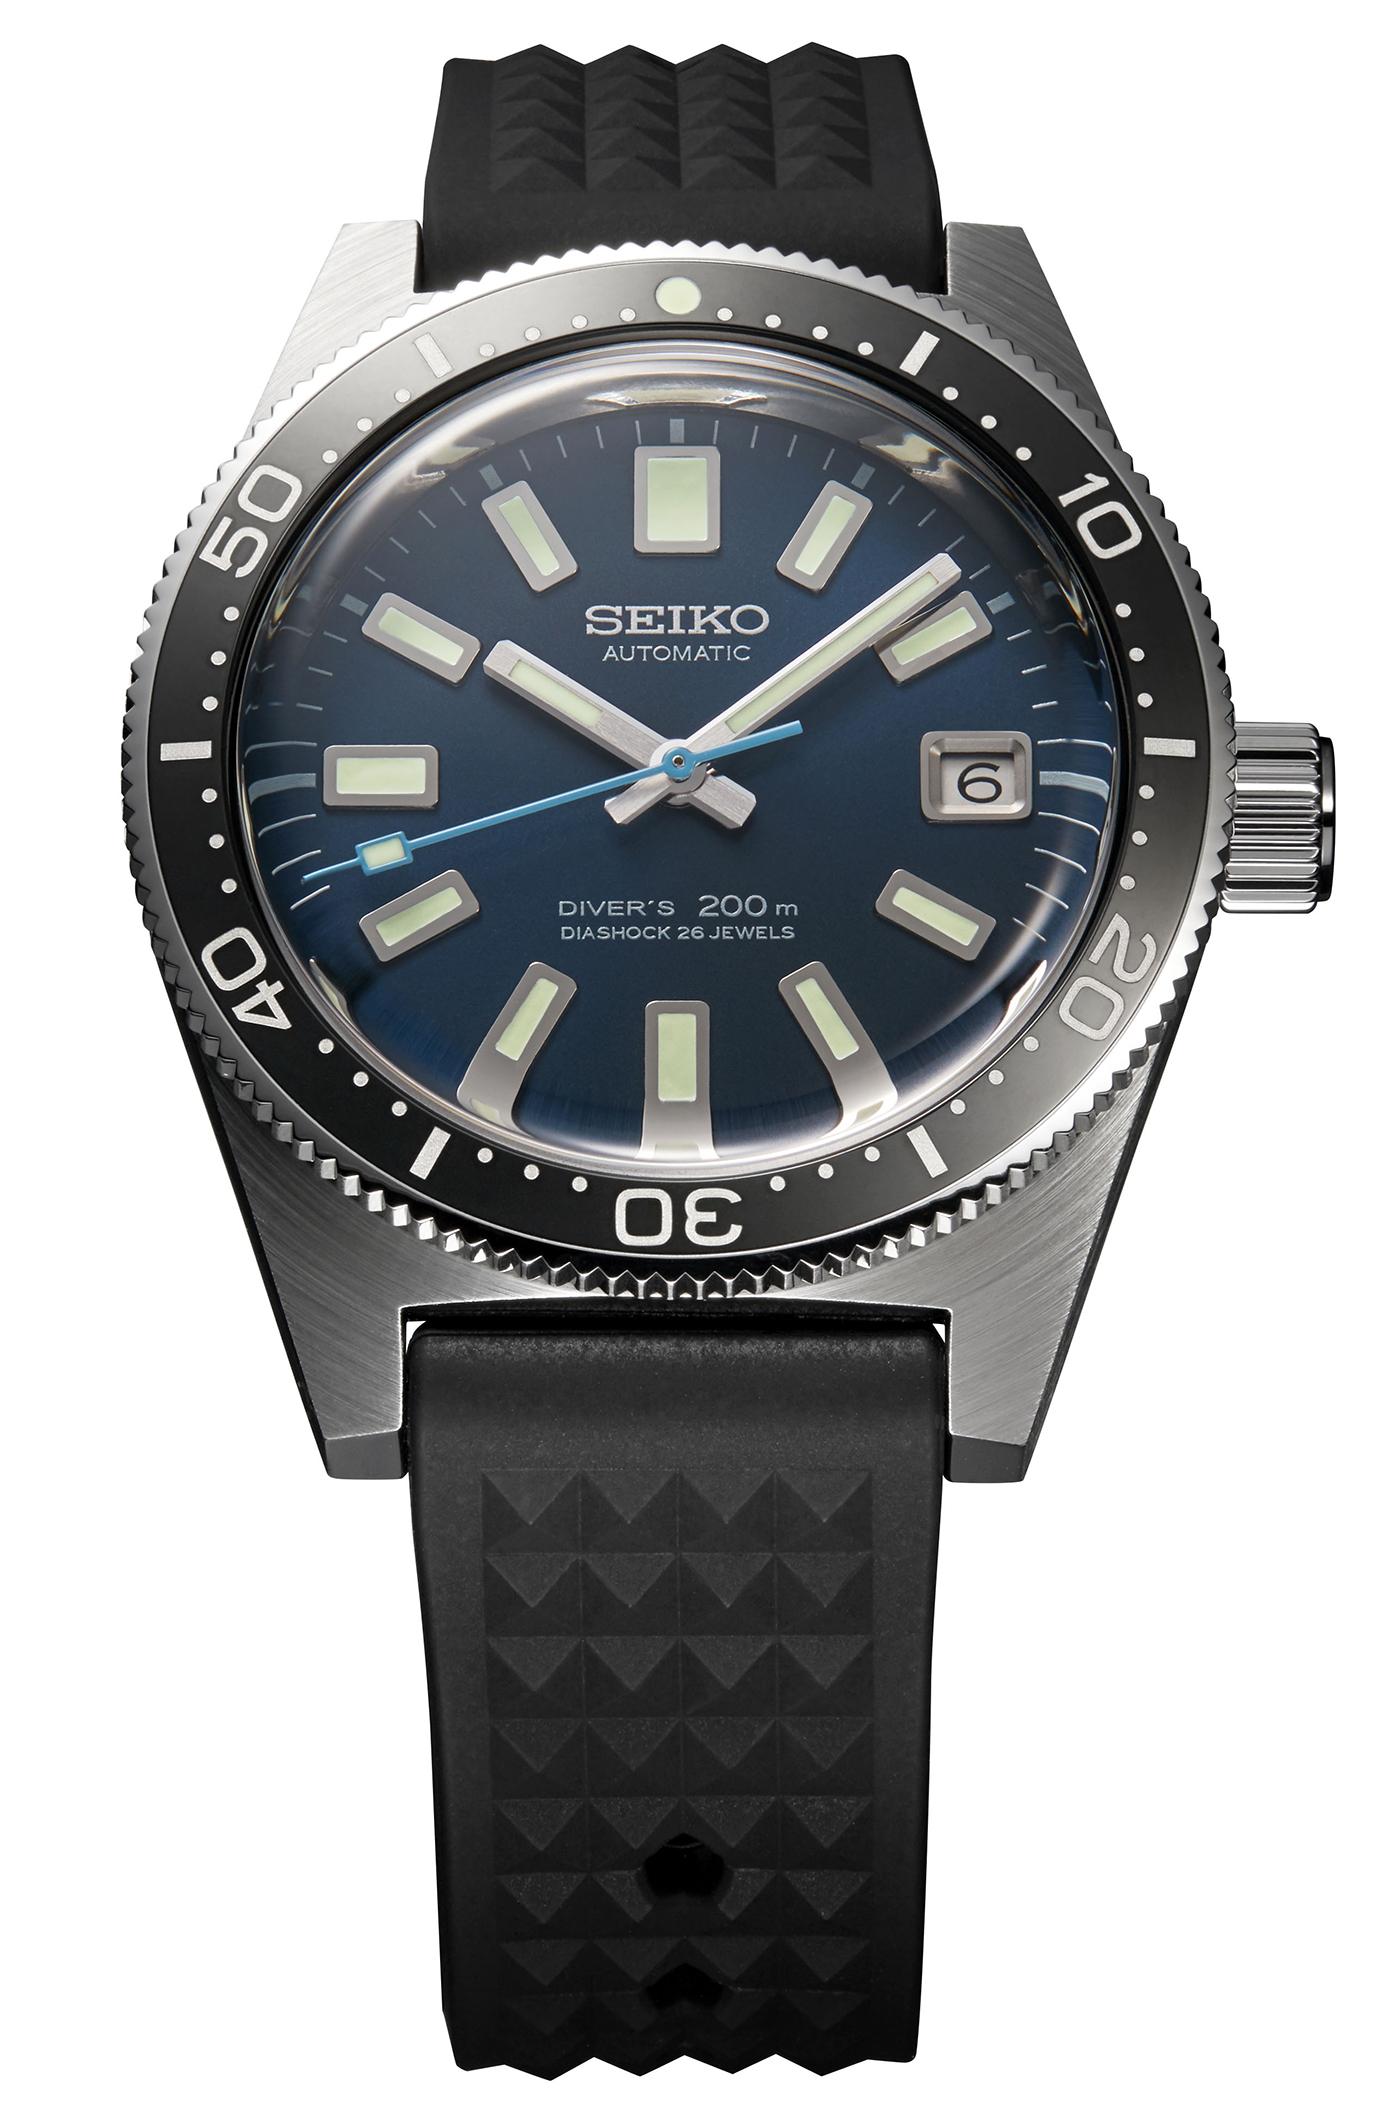 Seiko Debuts Two New Limited Edition 55th Anniversary Dive Watch Models |  aBlogtoWatch